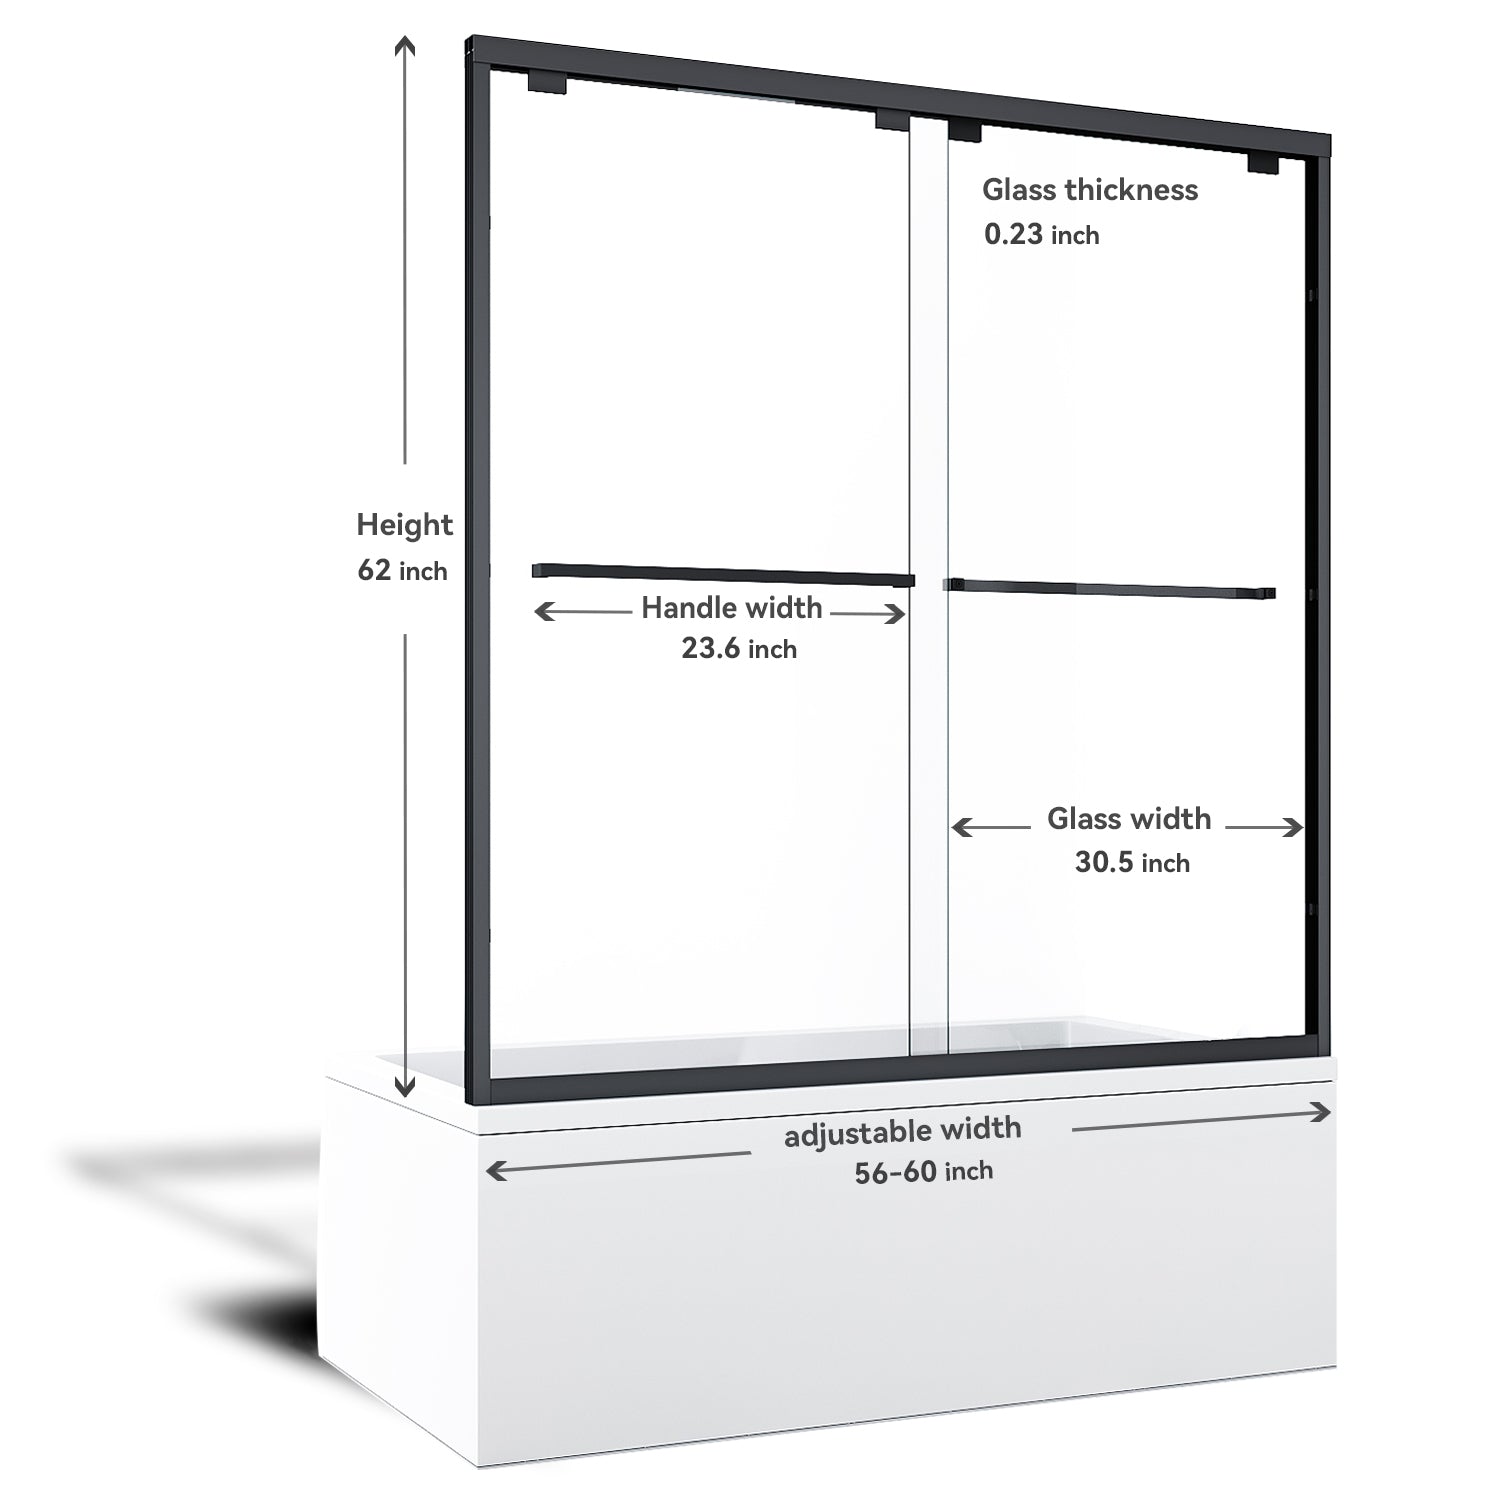 SUNNY SHOWER Bathtub Double Sliding Doors 60 in. W x 62 in. H Black Finish Size Chart